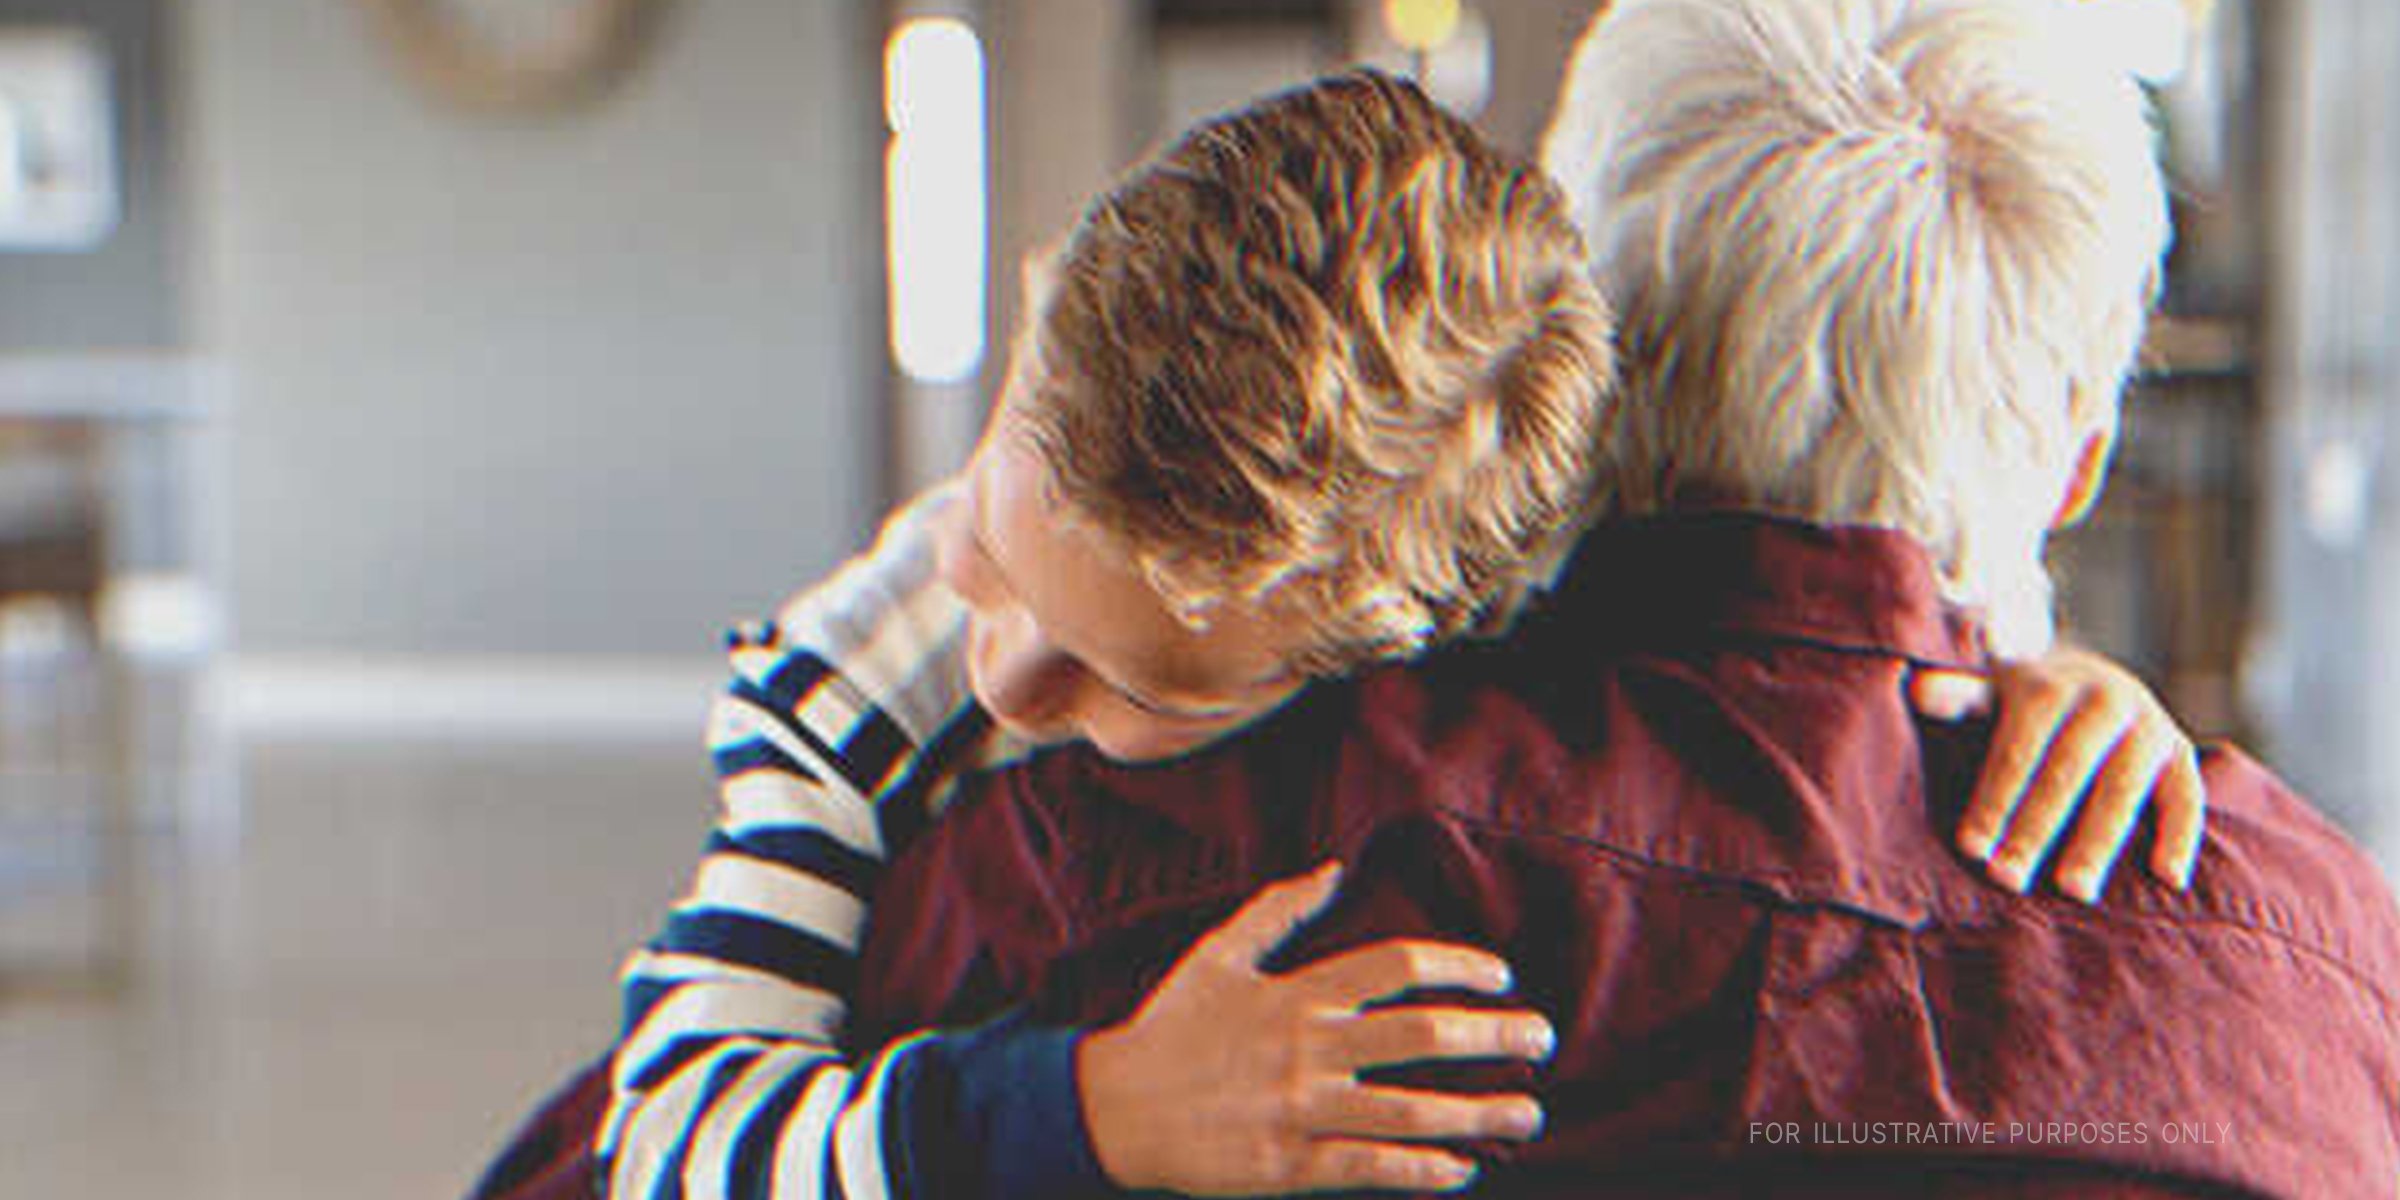 A young boy hugging his grandfather | Source: Shutterstock